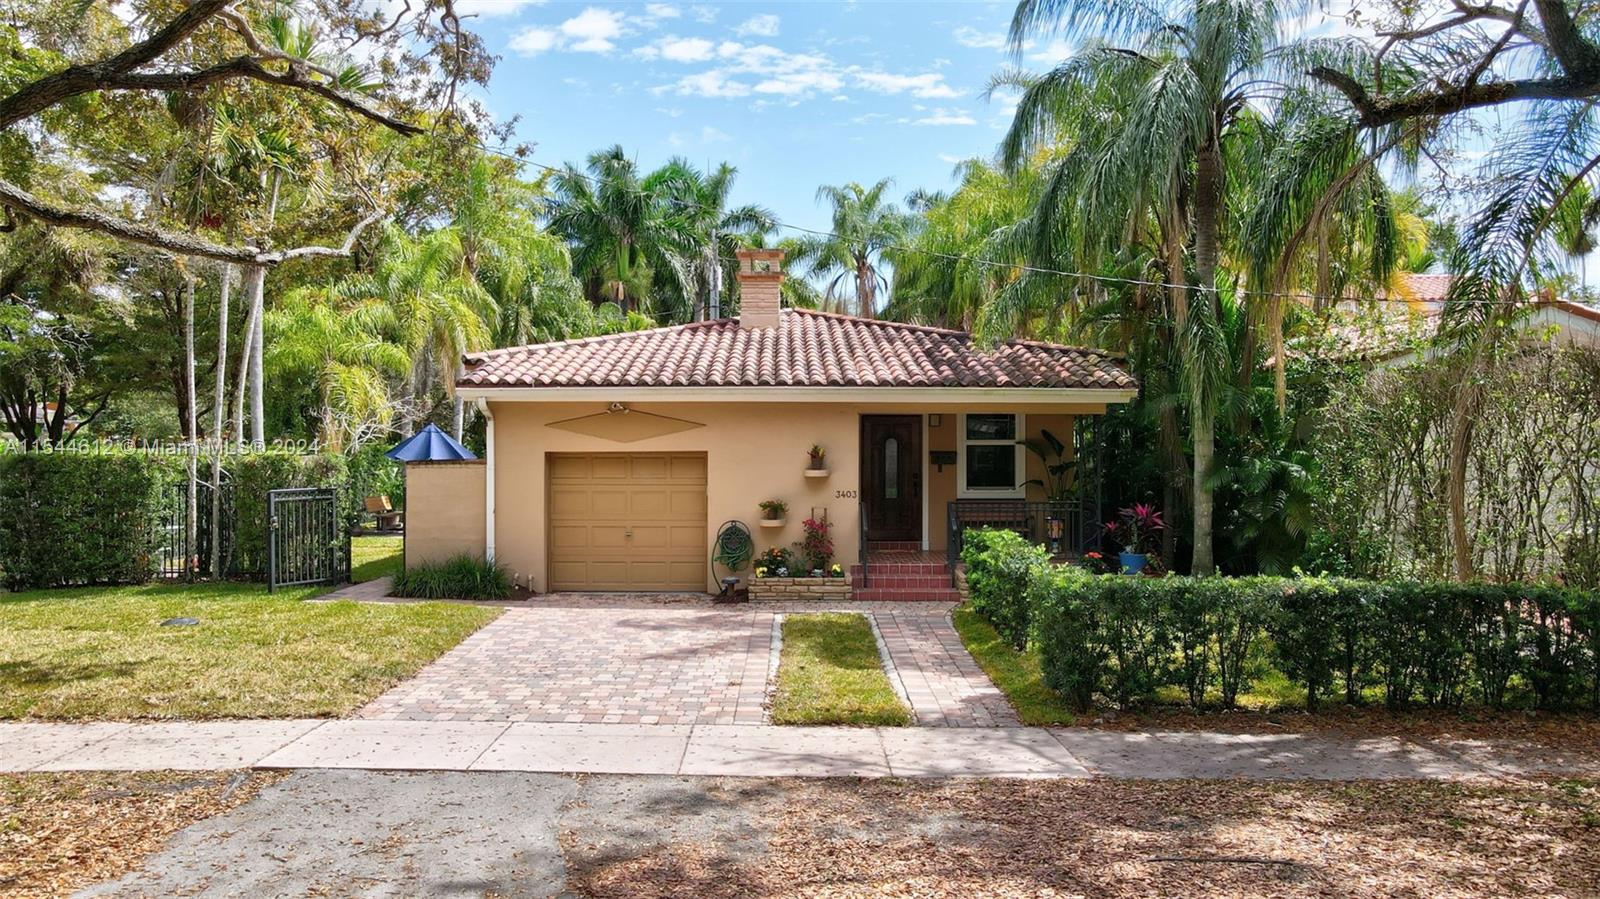 Property for Sale at 3403 Anderson Rd Rd, Coral Gables, Broward County, Florida - Bedrooms: 3 
Bathrooms: 2  - $1,475,000